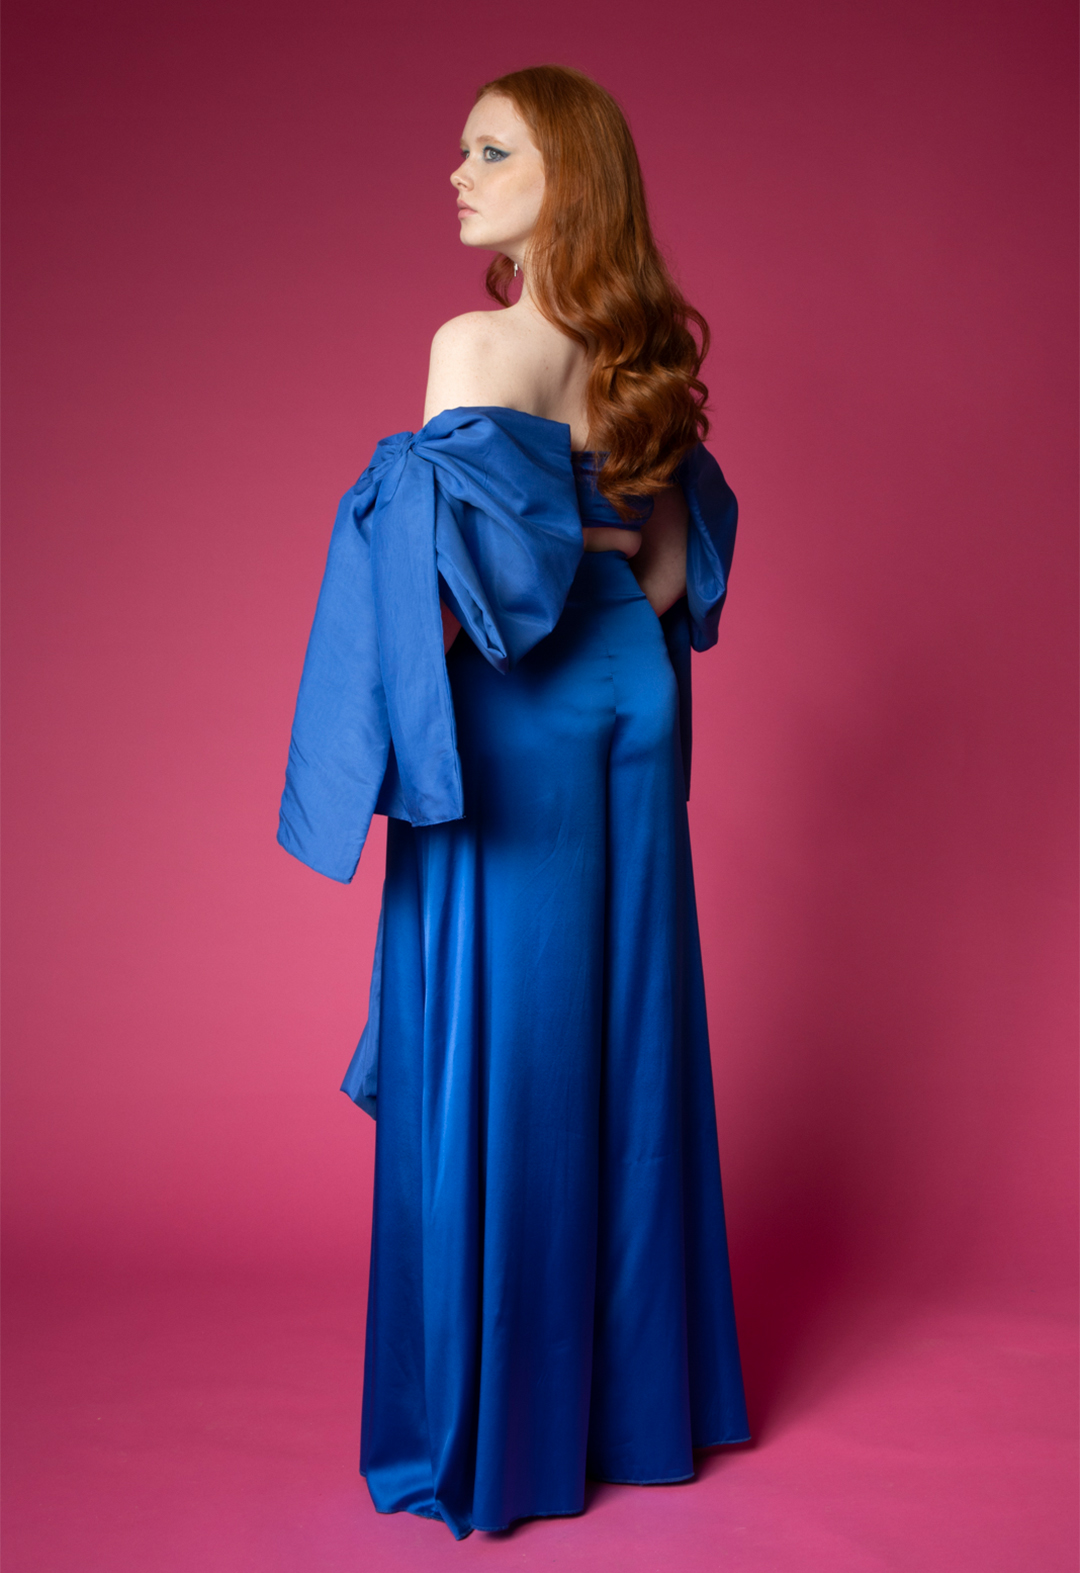 A back-view photo shows a model wearing a royal blue charmeuse bandeau, with matching cotton voile bows and palazzo pants.